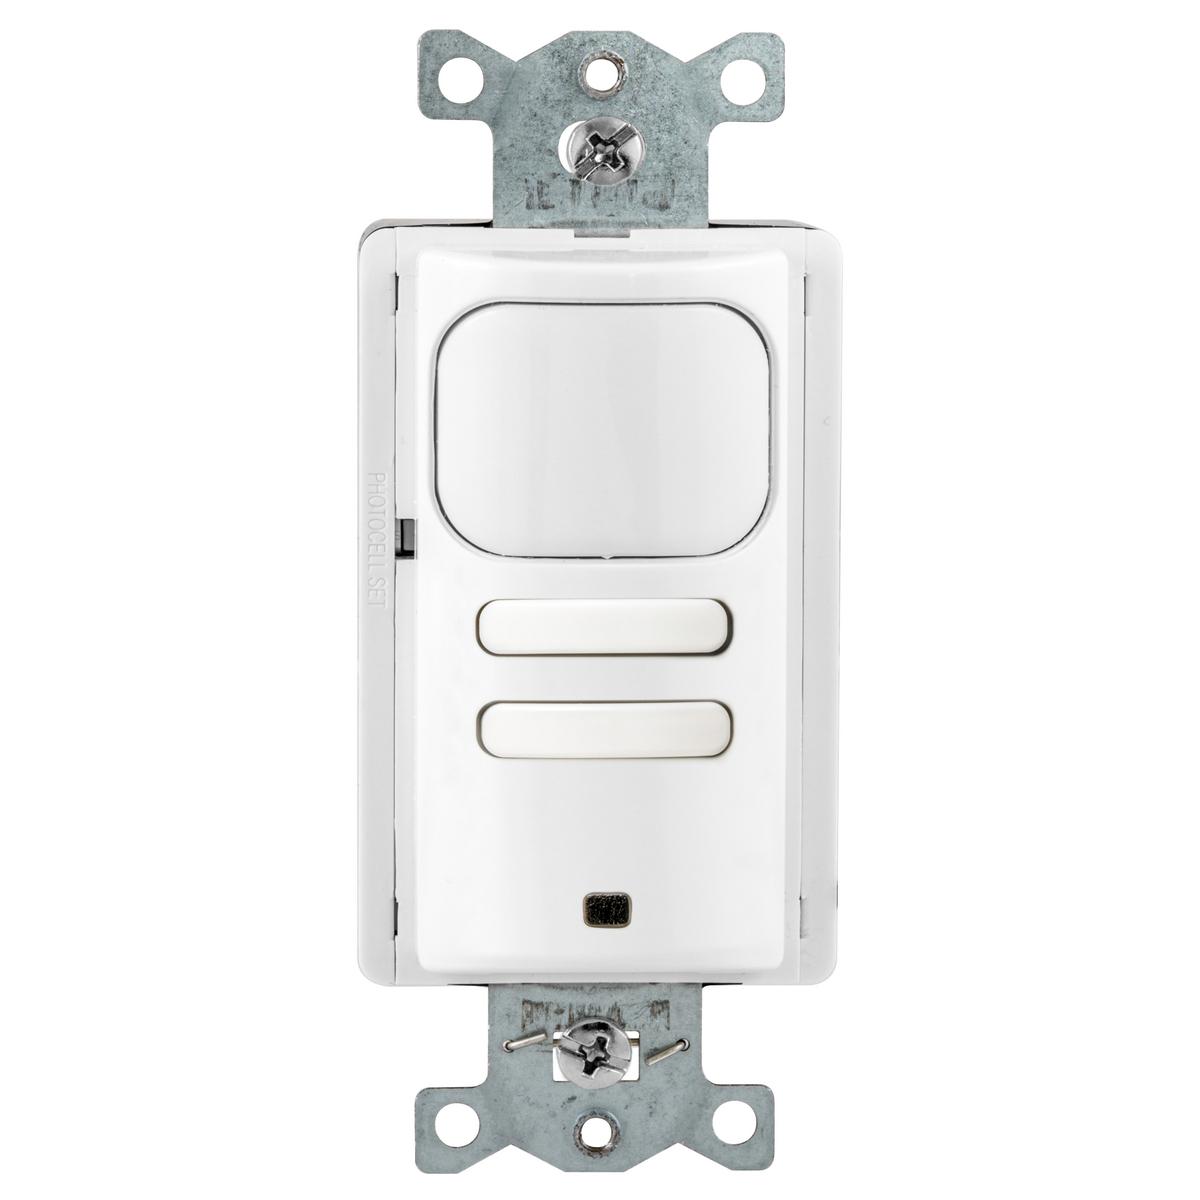 Hubbell AP2001W22 Vacancy Sensors, Wall Switch, AdaptivePassive Infrared, 2 Circuit, 120/277V AC, White 